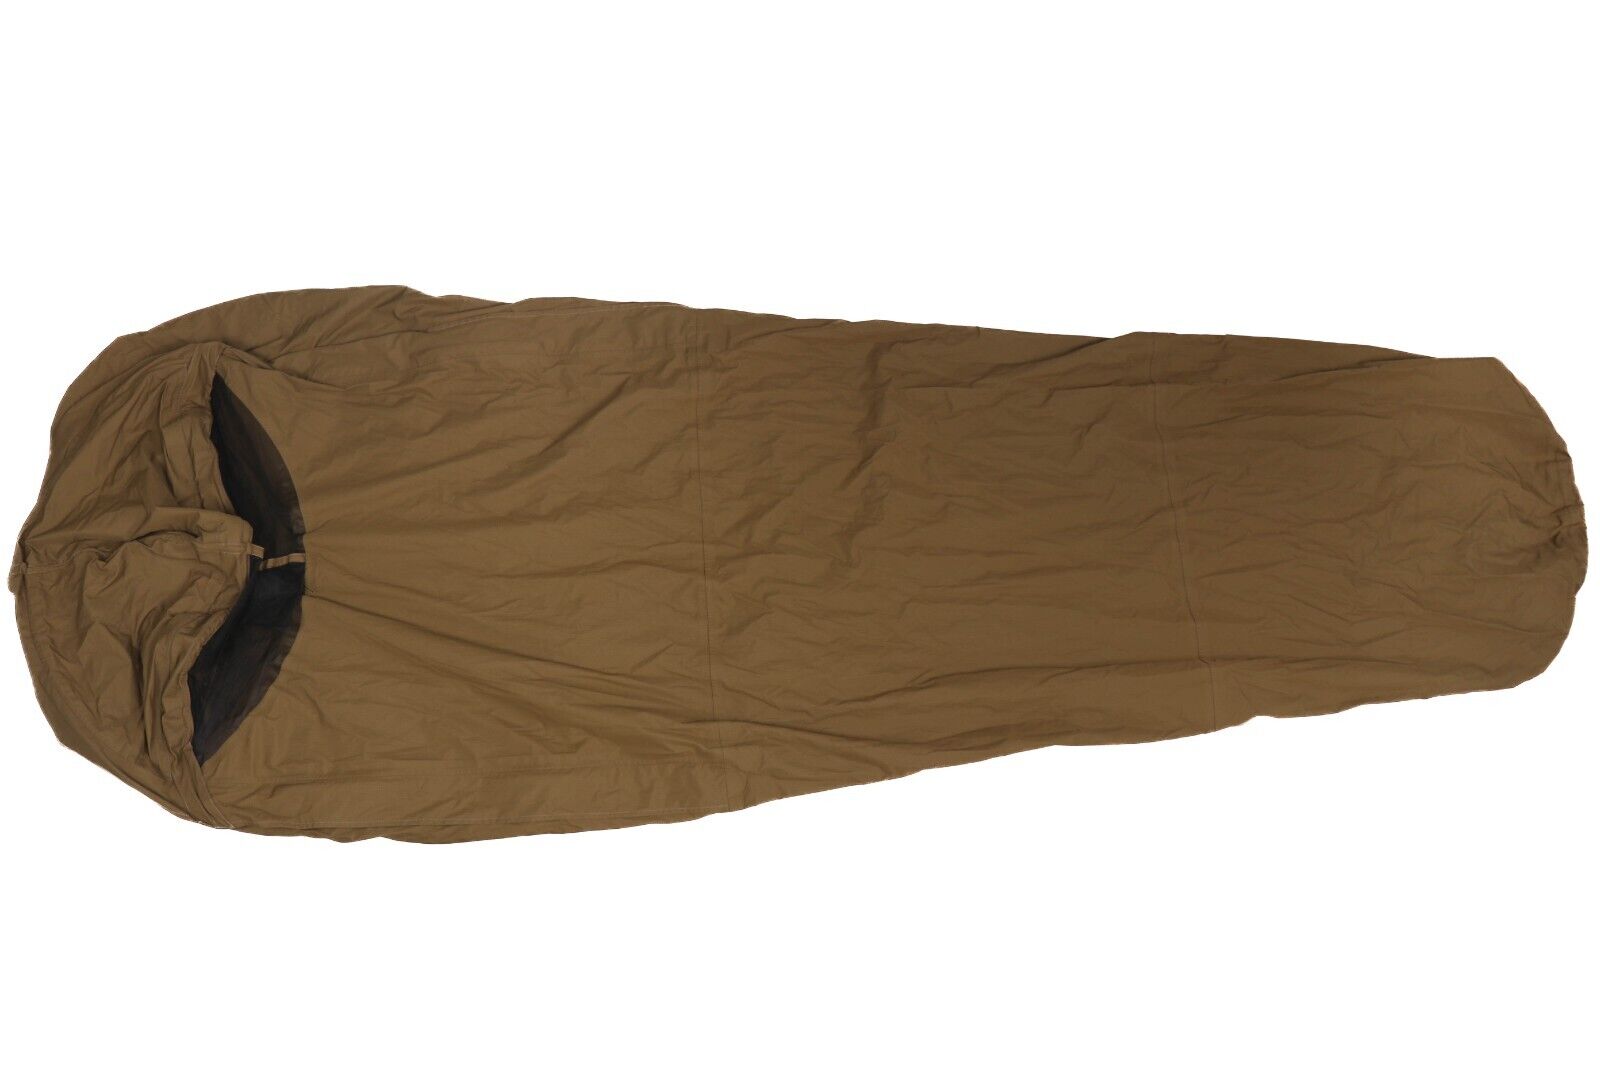 DAMAGED USMC Improved Bivy Cover Marine Corps Coyote Waterproof Sleeping Cover